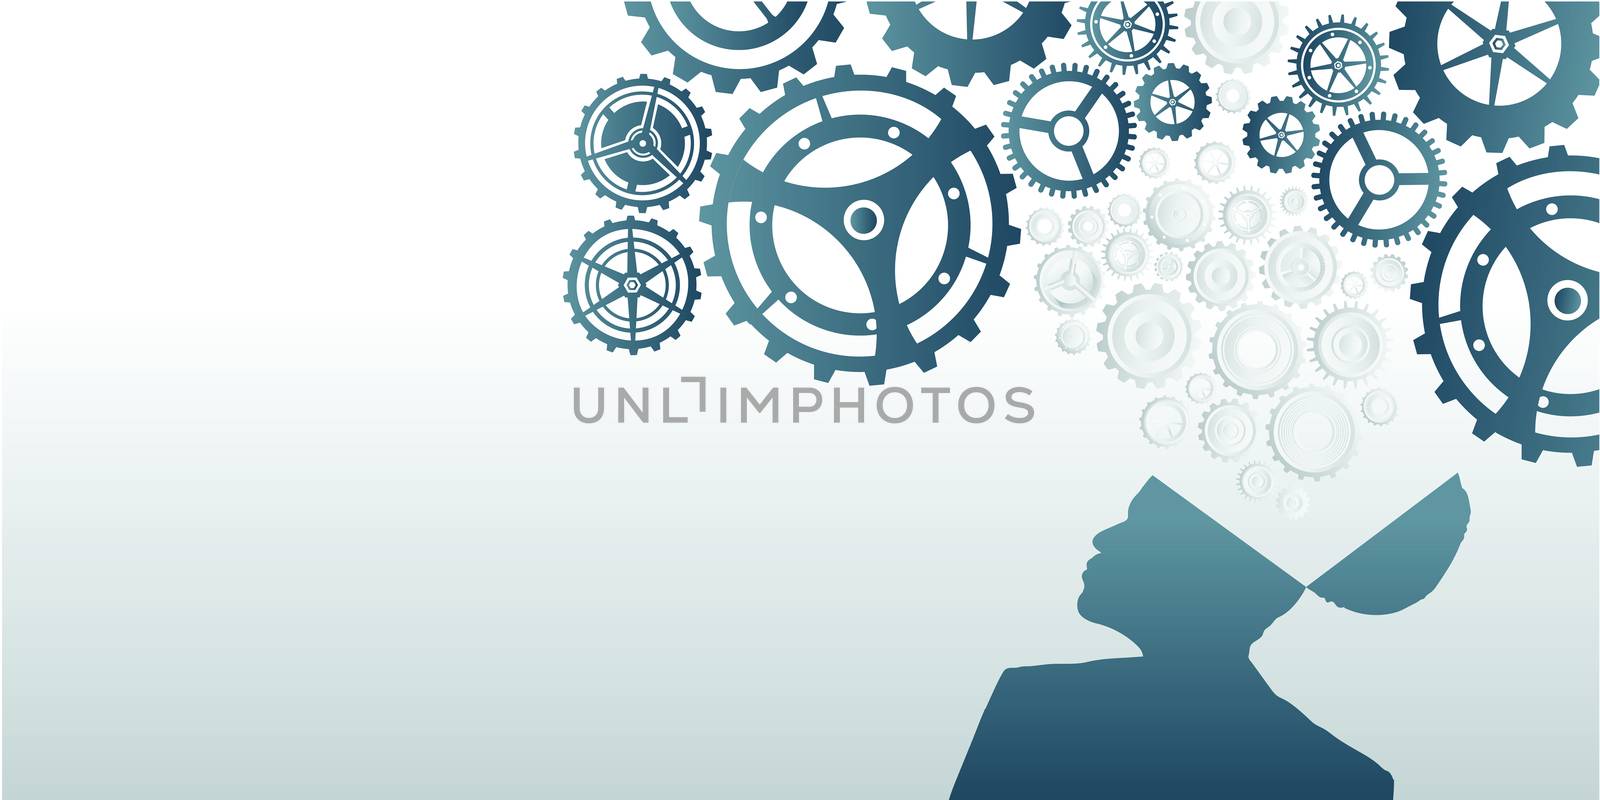 Vector images with thinking gears concept grey background